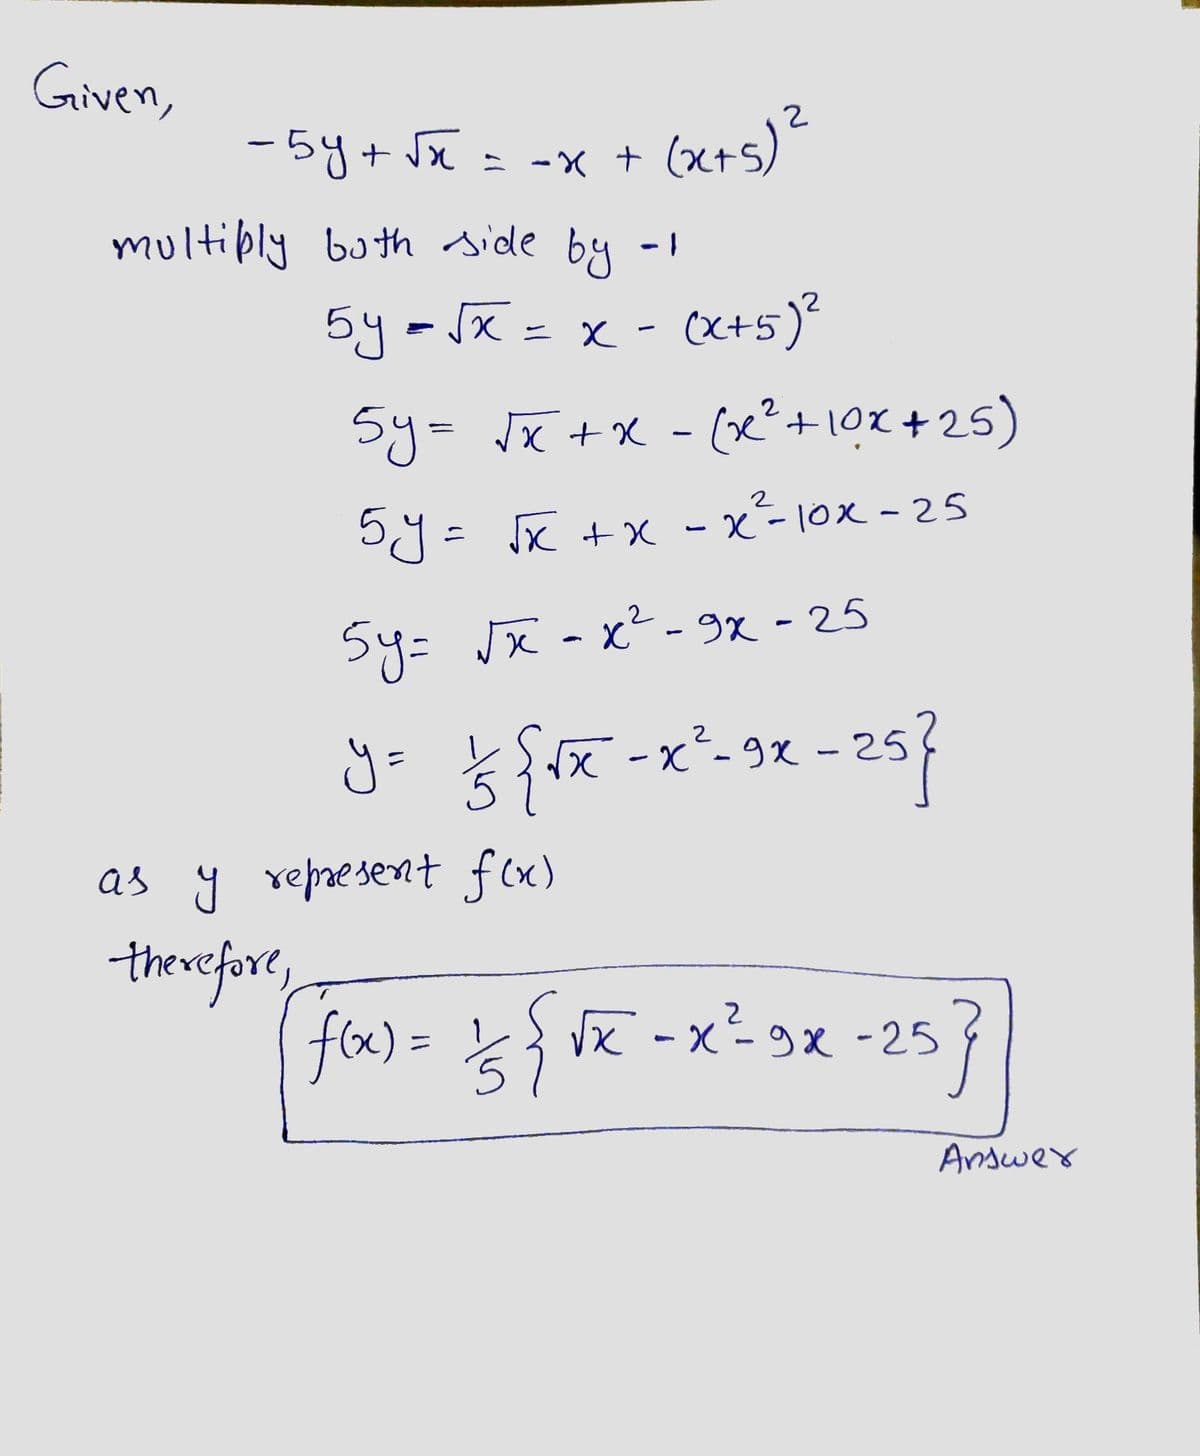 Given,
-5y+ Jx = -x + (x+s)
multibly both side by -1
5y-Jx = x
- (X+5)²
Sy= JX +X - (x²+10x +25)
%3D
5y= x +x - x²-10x - 25
Sy=
Jx - x - 9x - 25
257
2
j= -x´-9x - 29
as y represent f(x)
therefore,
fax) = 는 VK-x29x -25
%3D
Andwey
